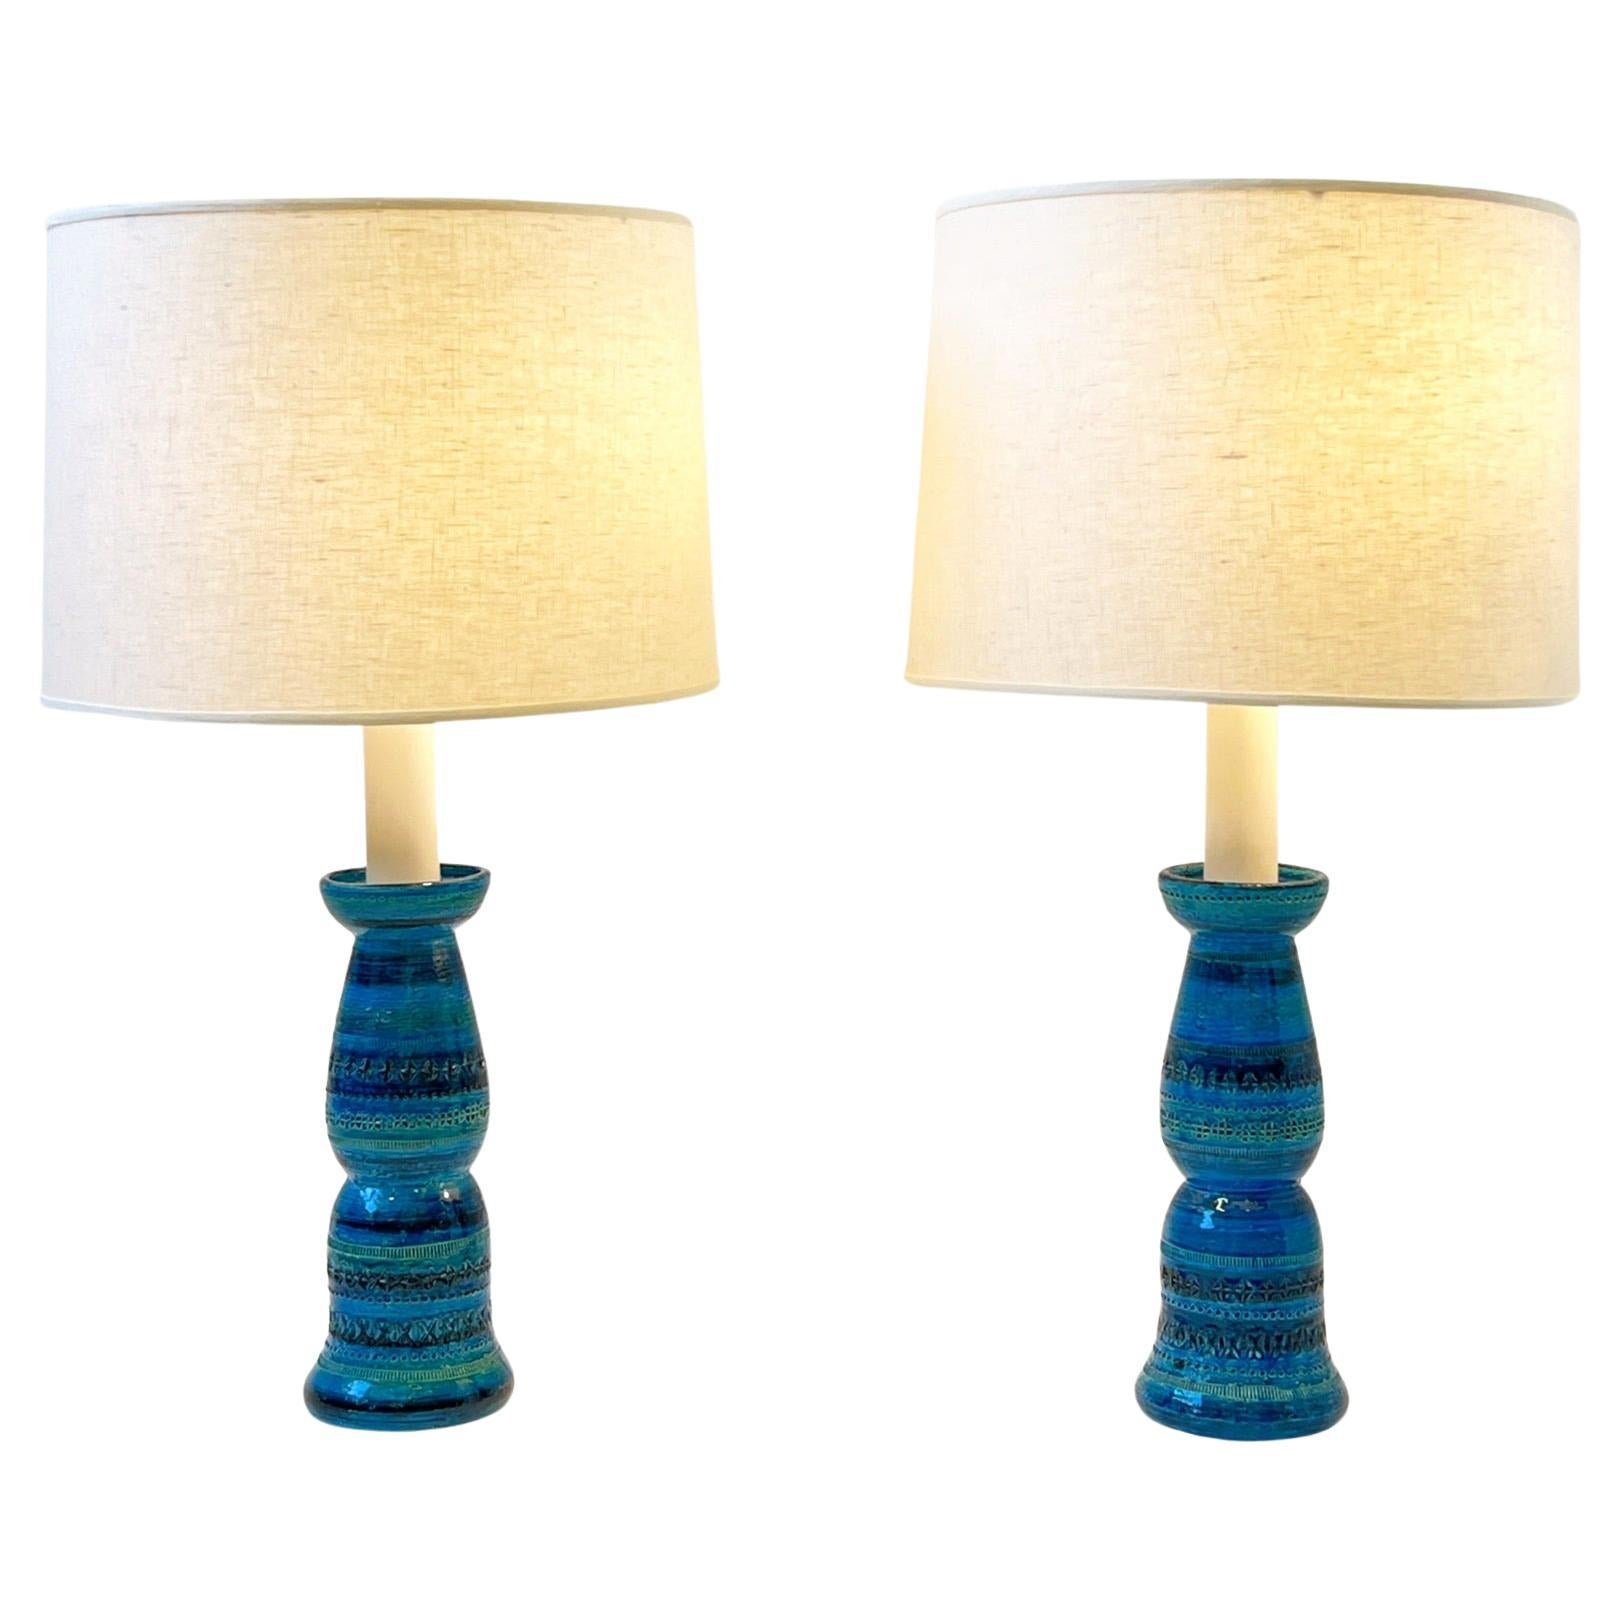 Pair of Italian Ceramic and Nickel Table Lamps by Aldo Londi for Bitossi